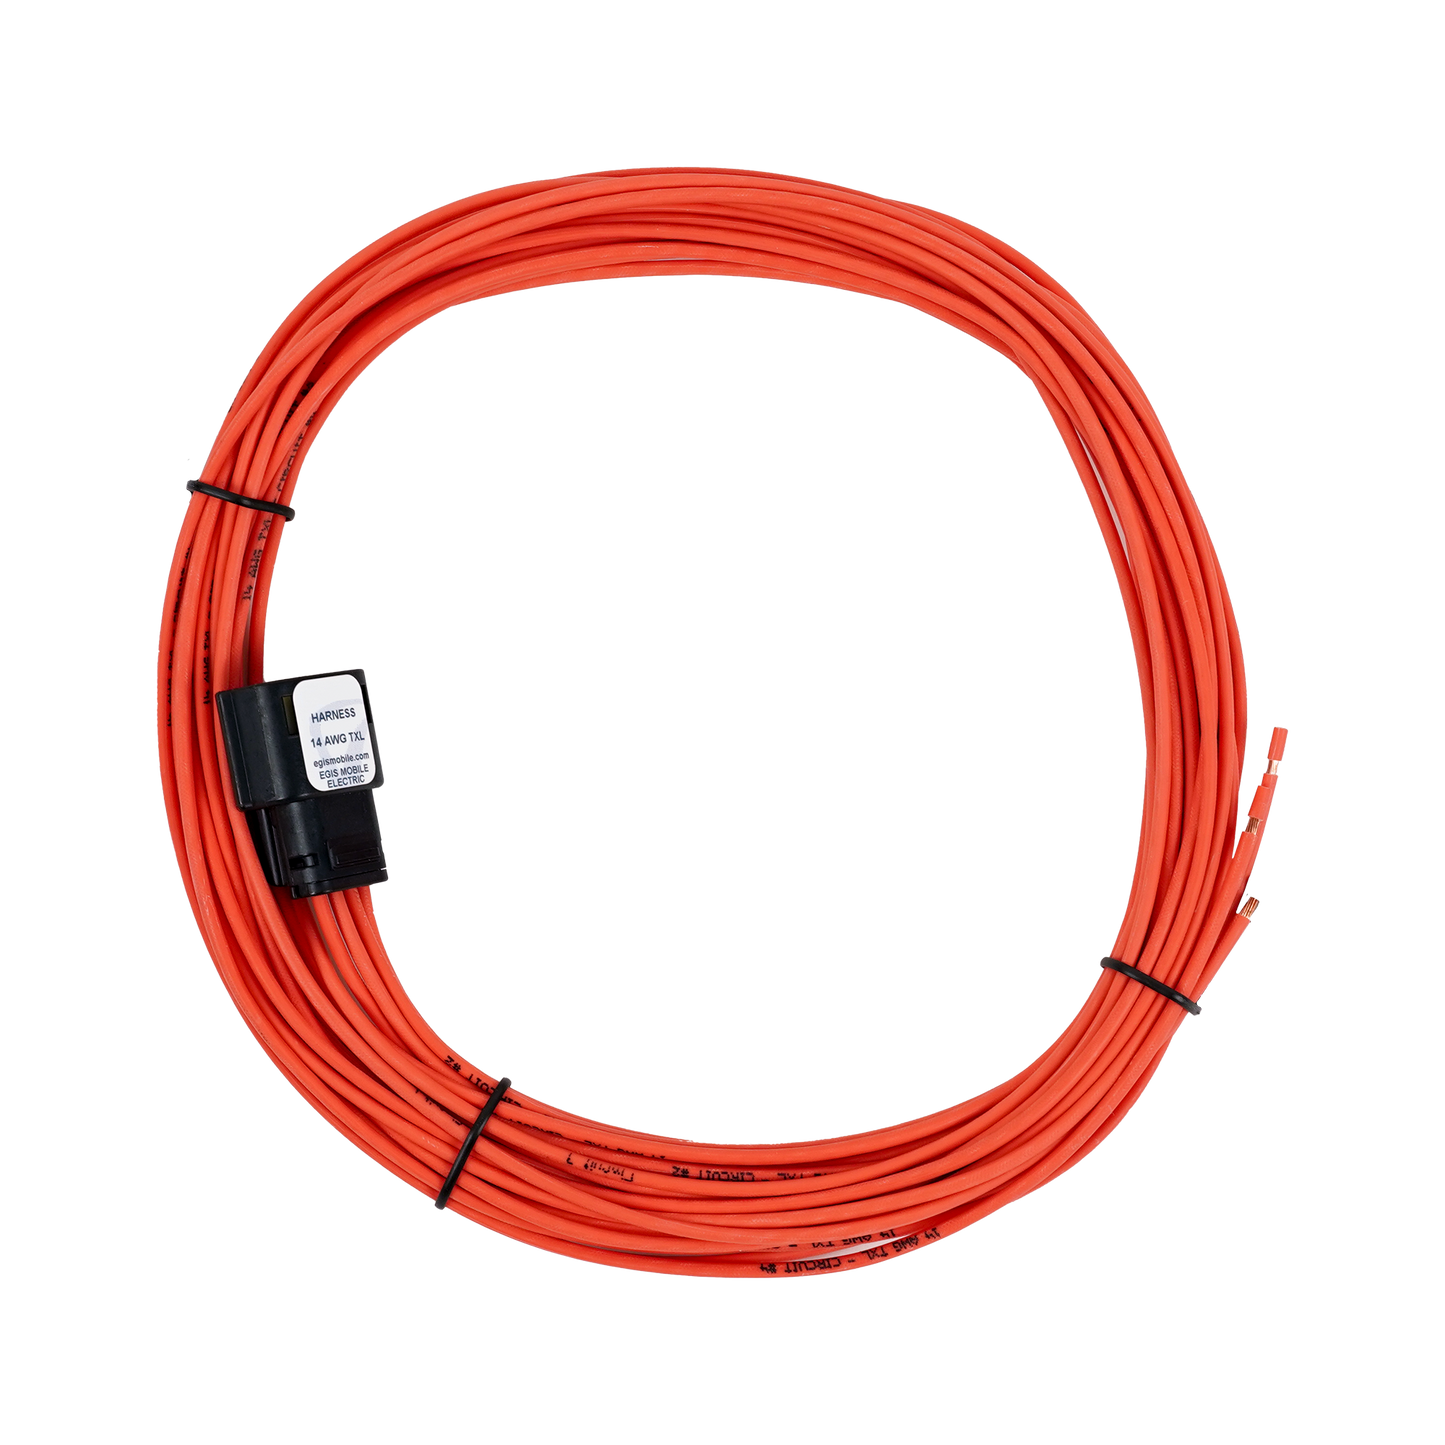 Harness for 8+2 Fuse Block, 14 AWG, 20ft  #1 to 4